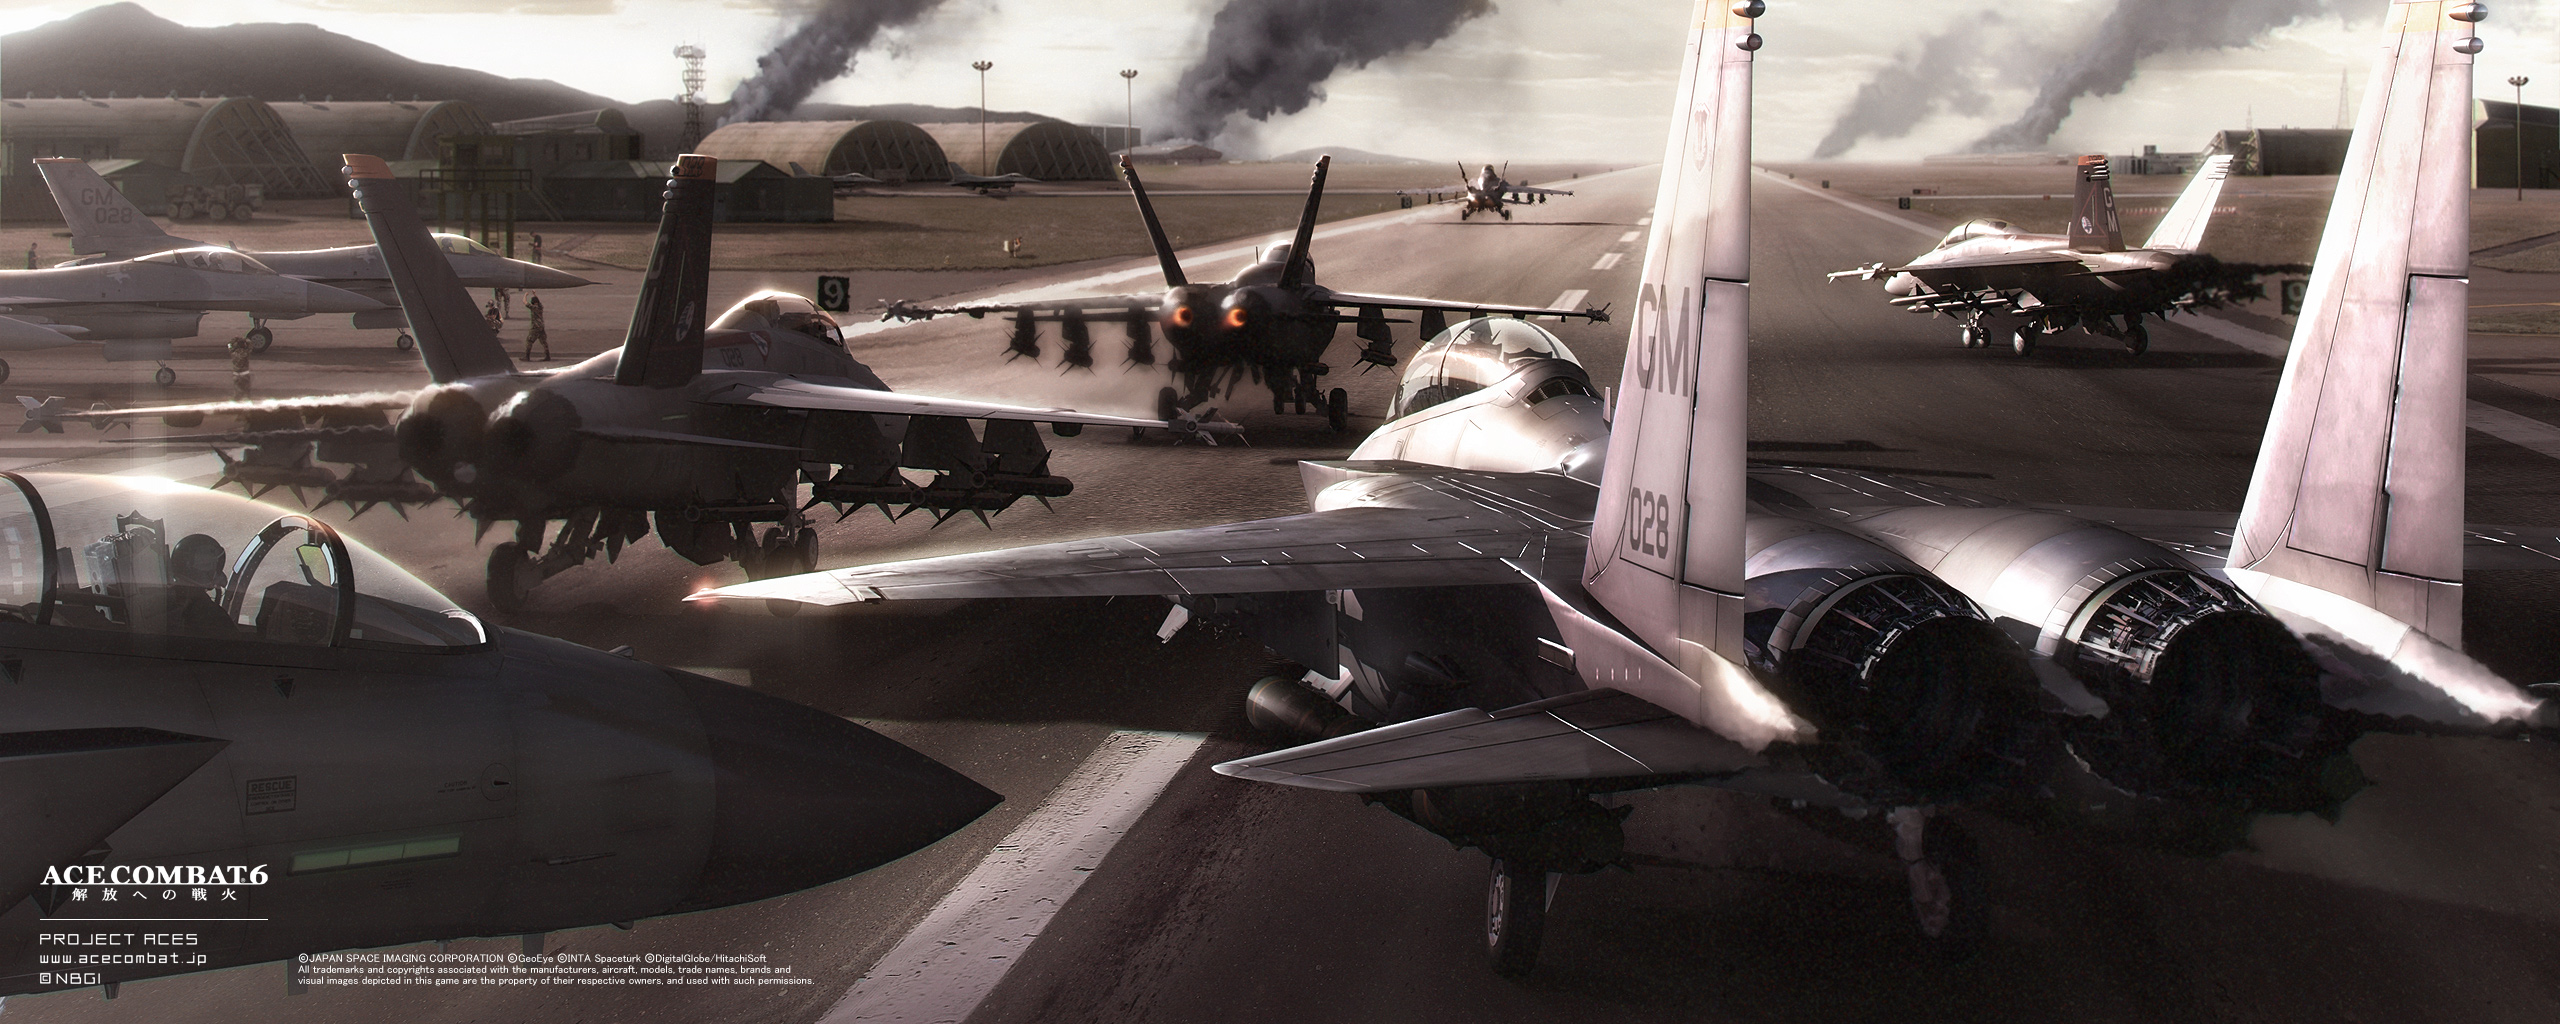 ace, Combat, Game, Jet, Airplane, Aircraft, Fighter, Plane, Military, Vg Wallpaper